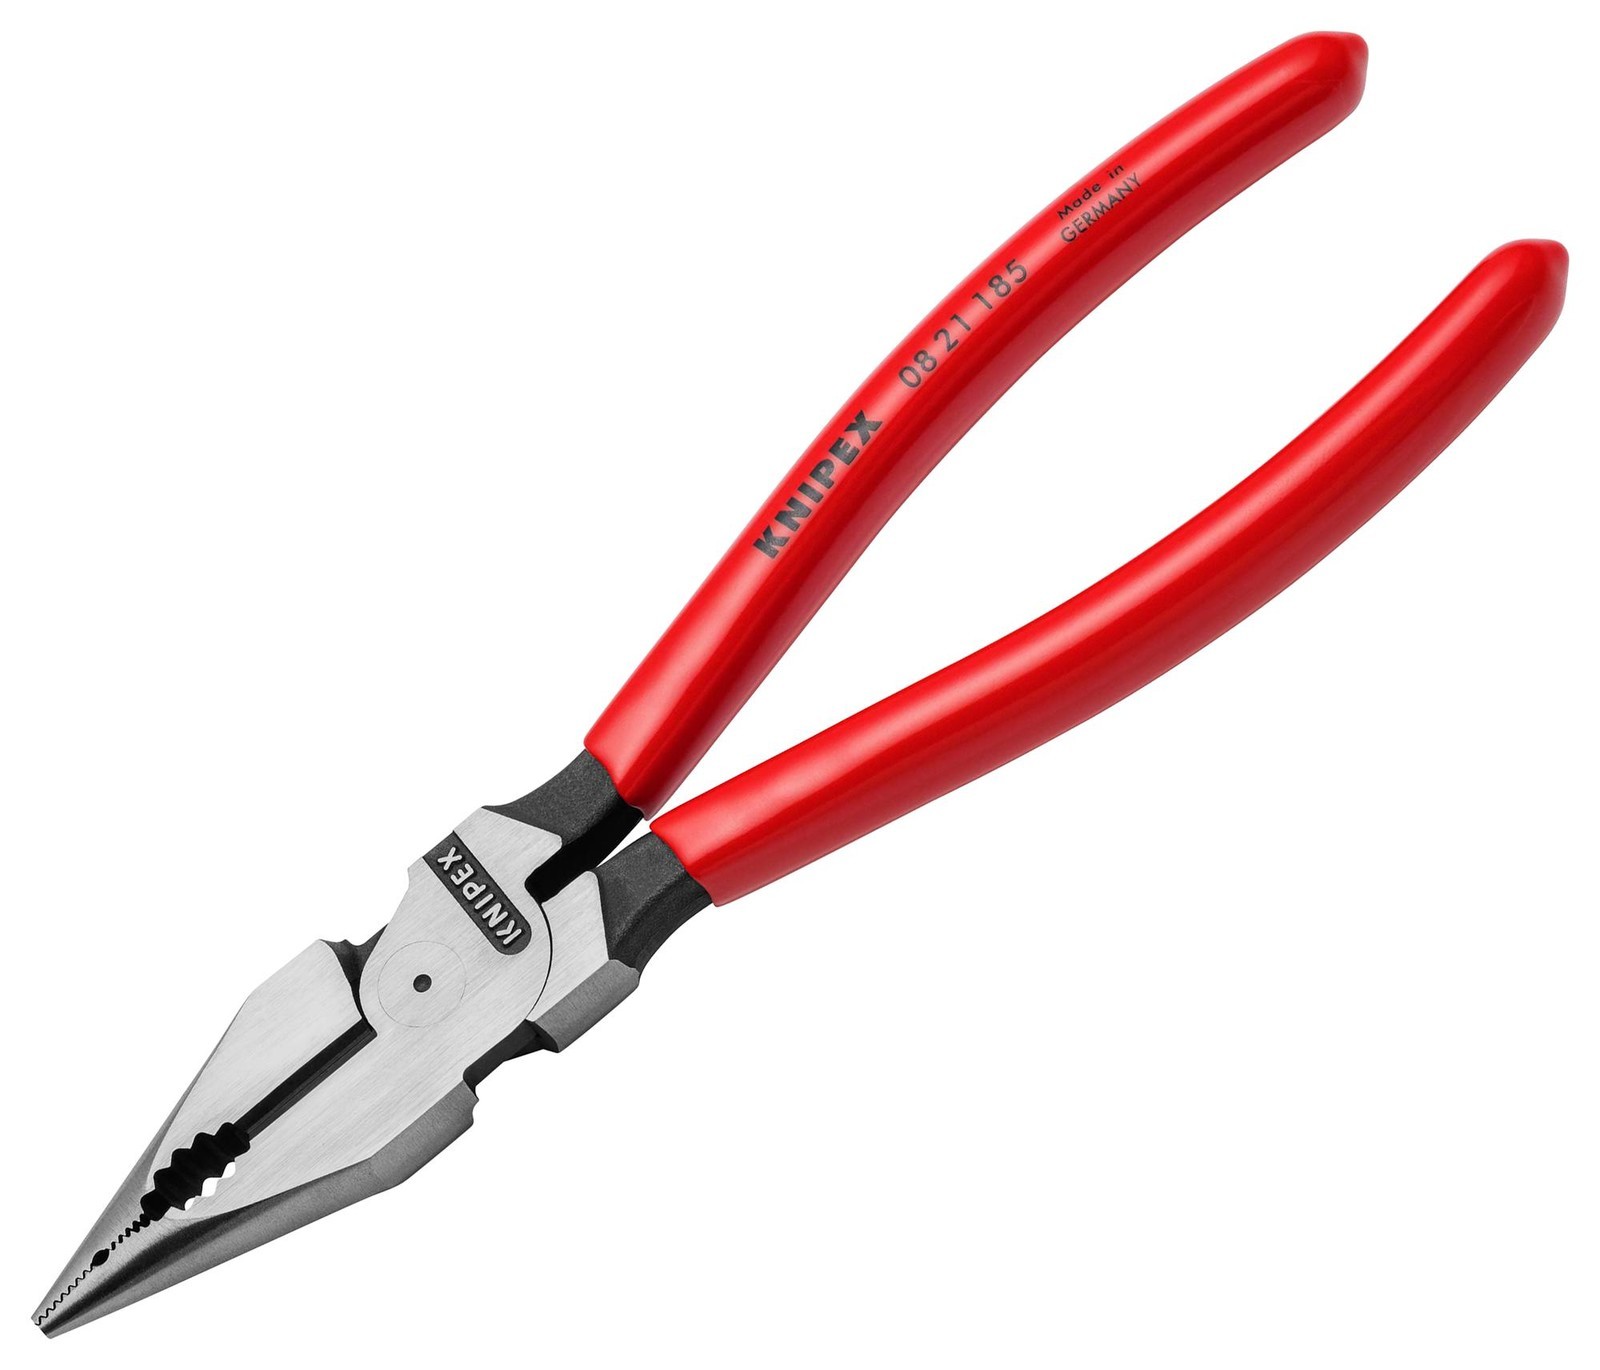 Knipex 08 21 185 Sb Combination Plier, Needle Nose, 185mm